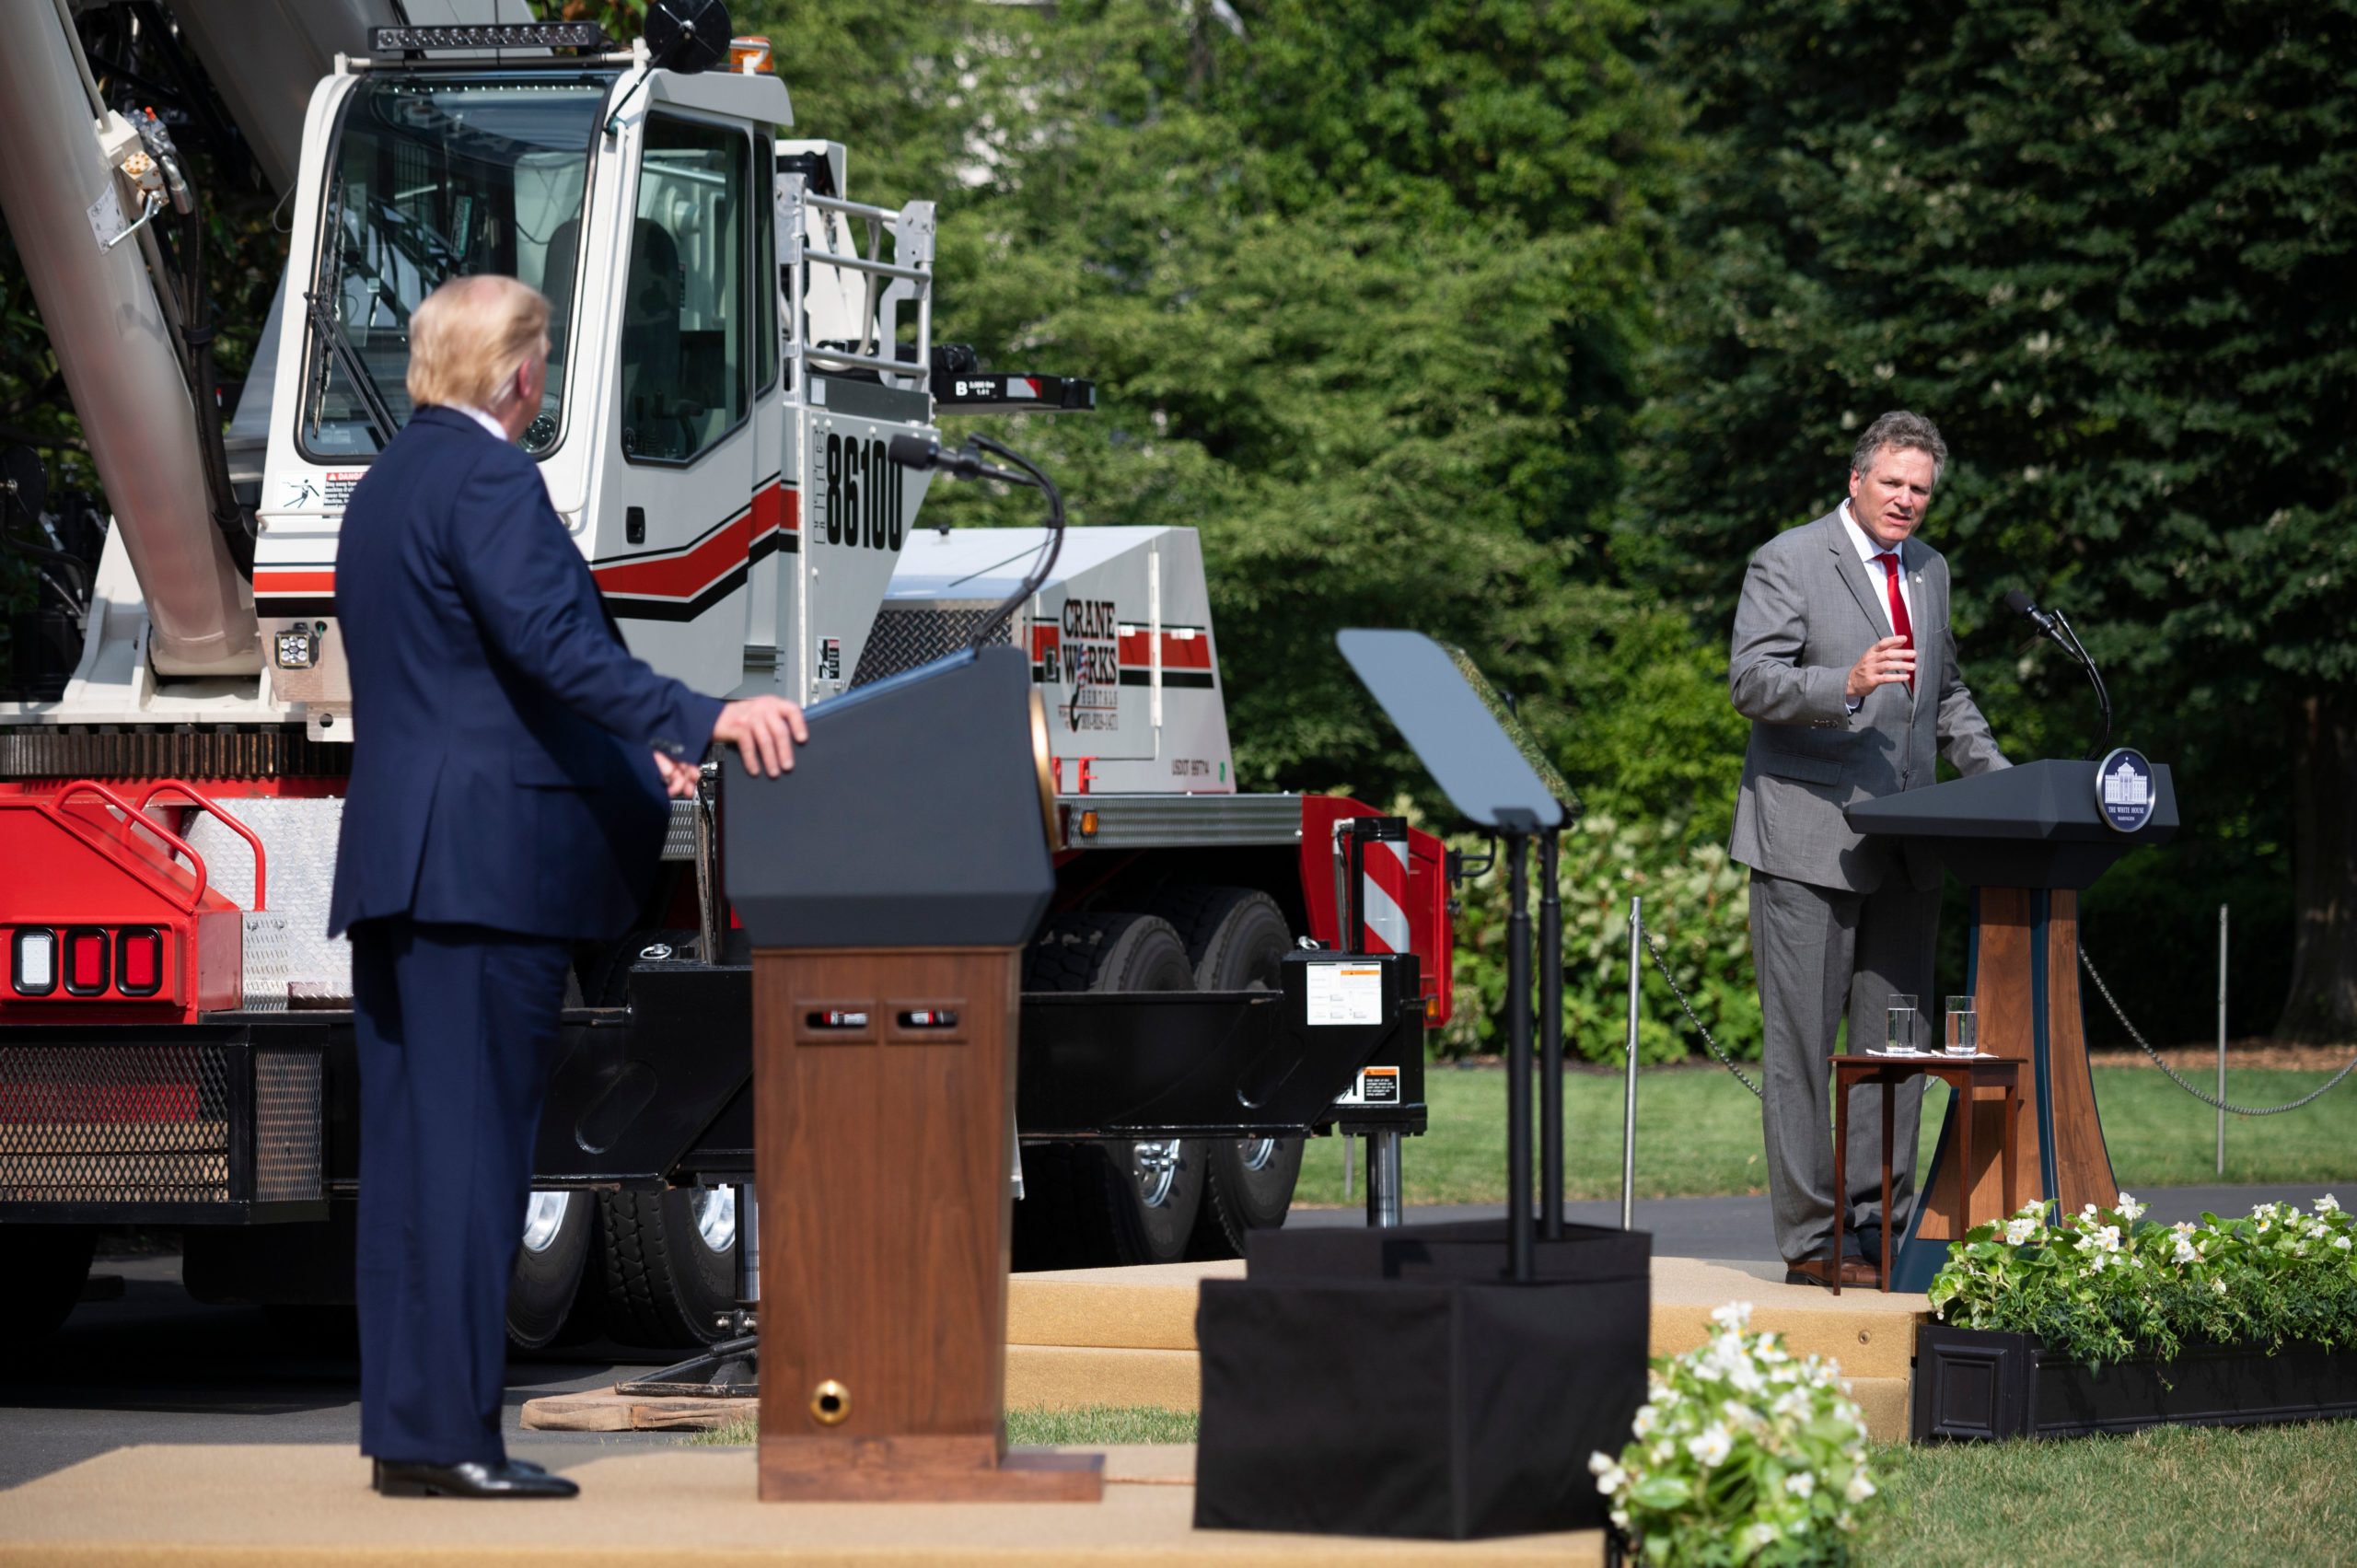 US President Donald Trump(L0 listens as Alaska Governor Mike Dunleavy (R-AK) speaks at the White House in Washington, DC, on July 16, 2020, during an event on Rolling Back Regulations to Help All Americans on the South Lawn at the White House on July 16, 2020 in Washington,DC. (Photo by JIM WATSON / AFP) (Photo by JIM WATSON/AFP via Getty Images)